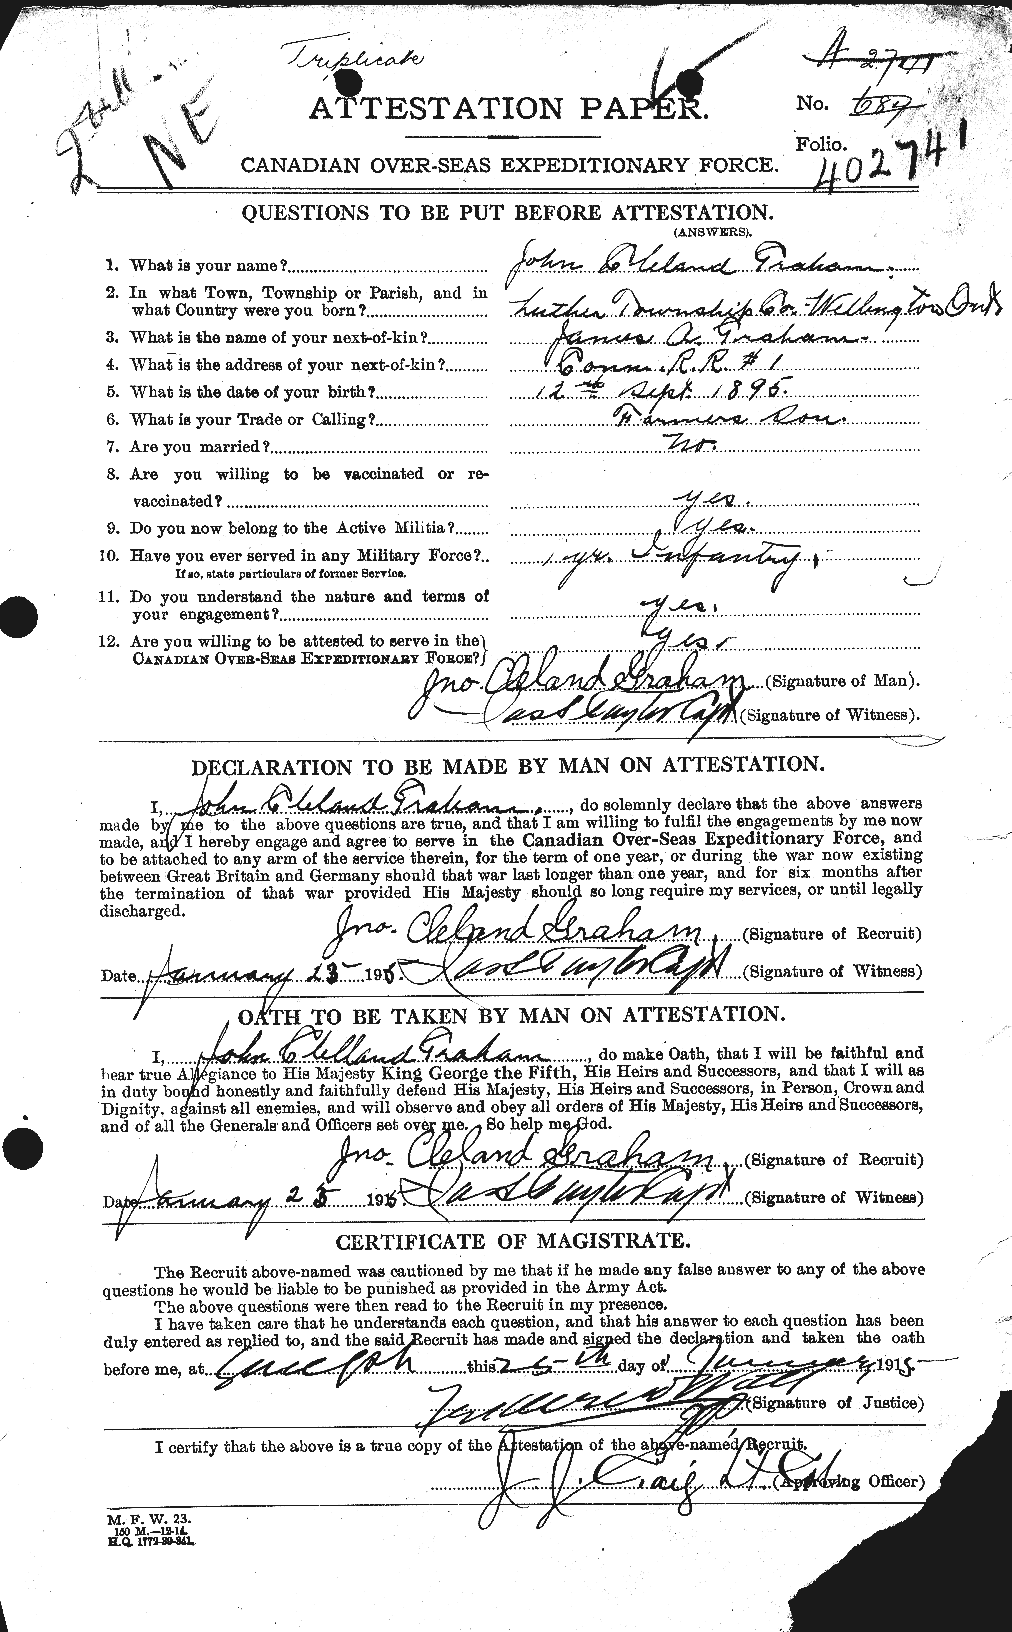 Personnel Records of the First World War - CEF 359162a